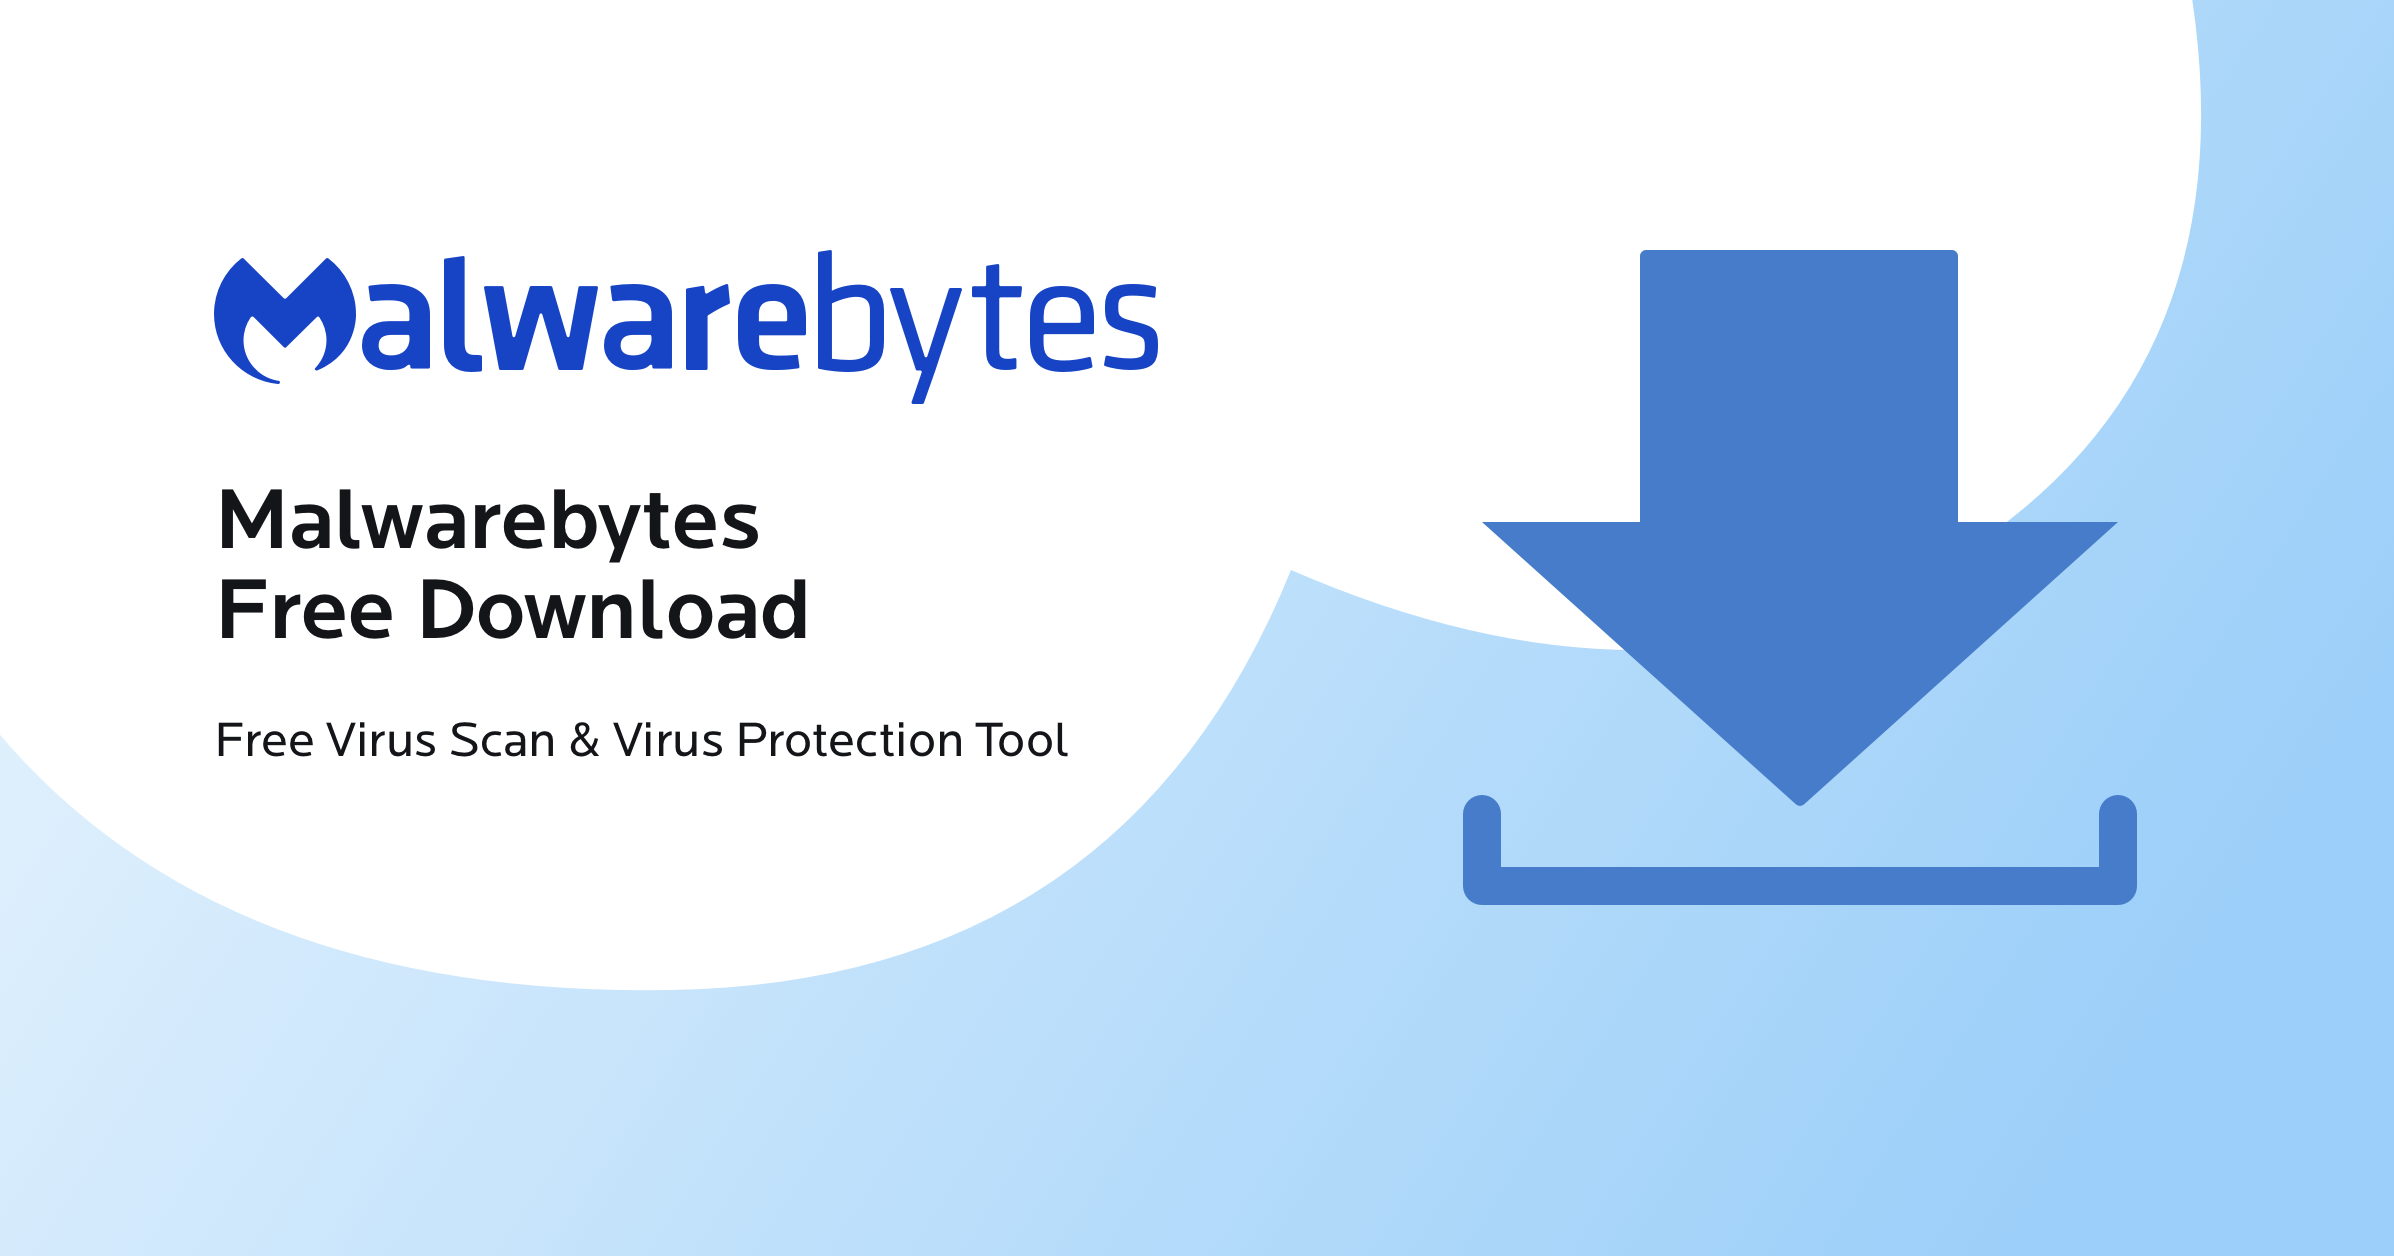 Download and install reputable anti-malware software such as Malwarebytes or Norton.
Run a full system scan.